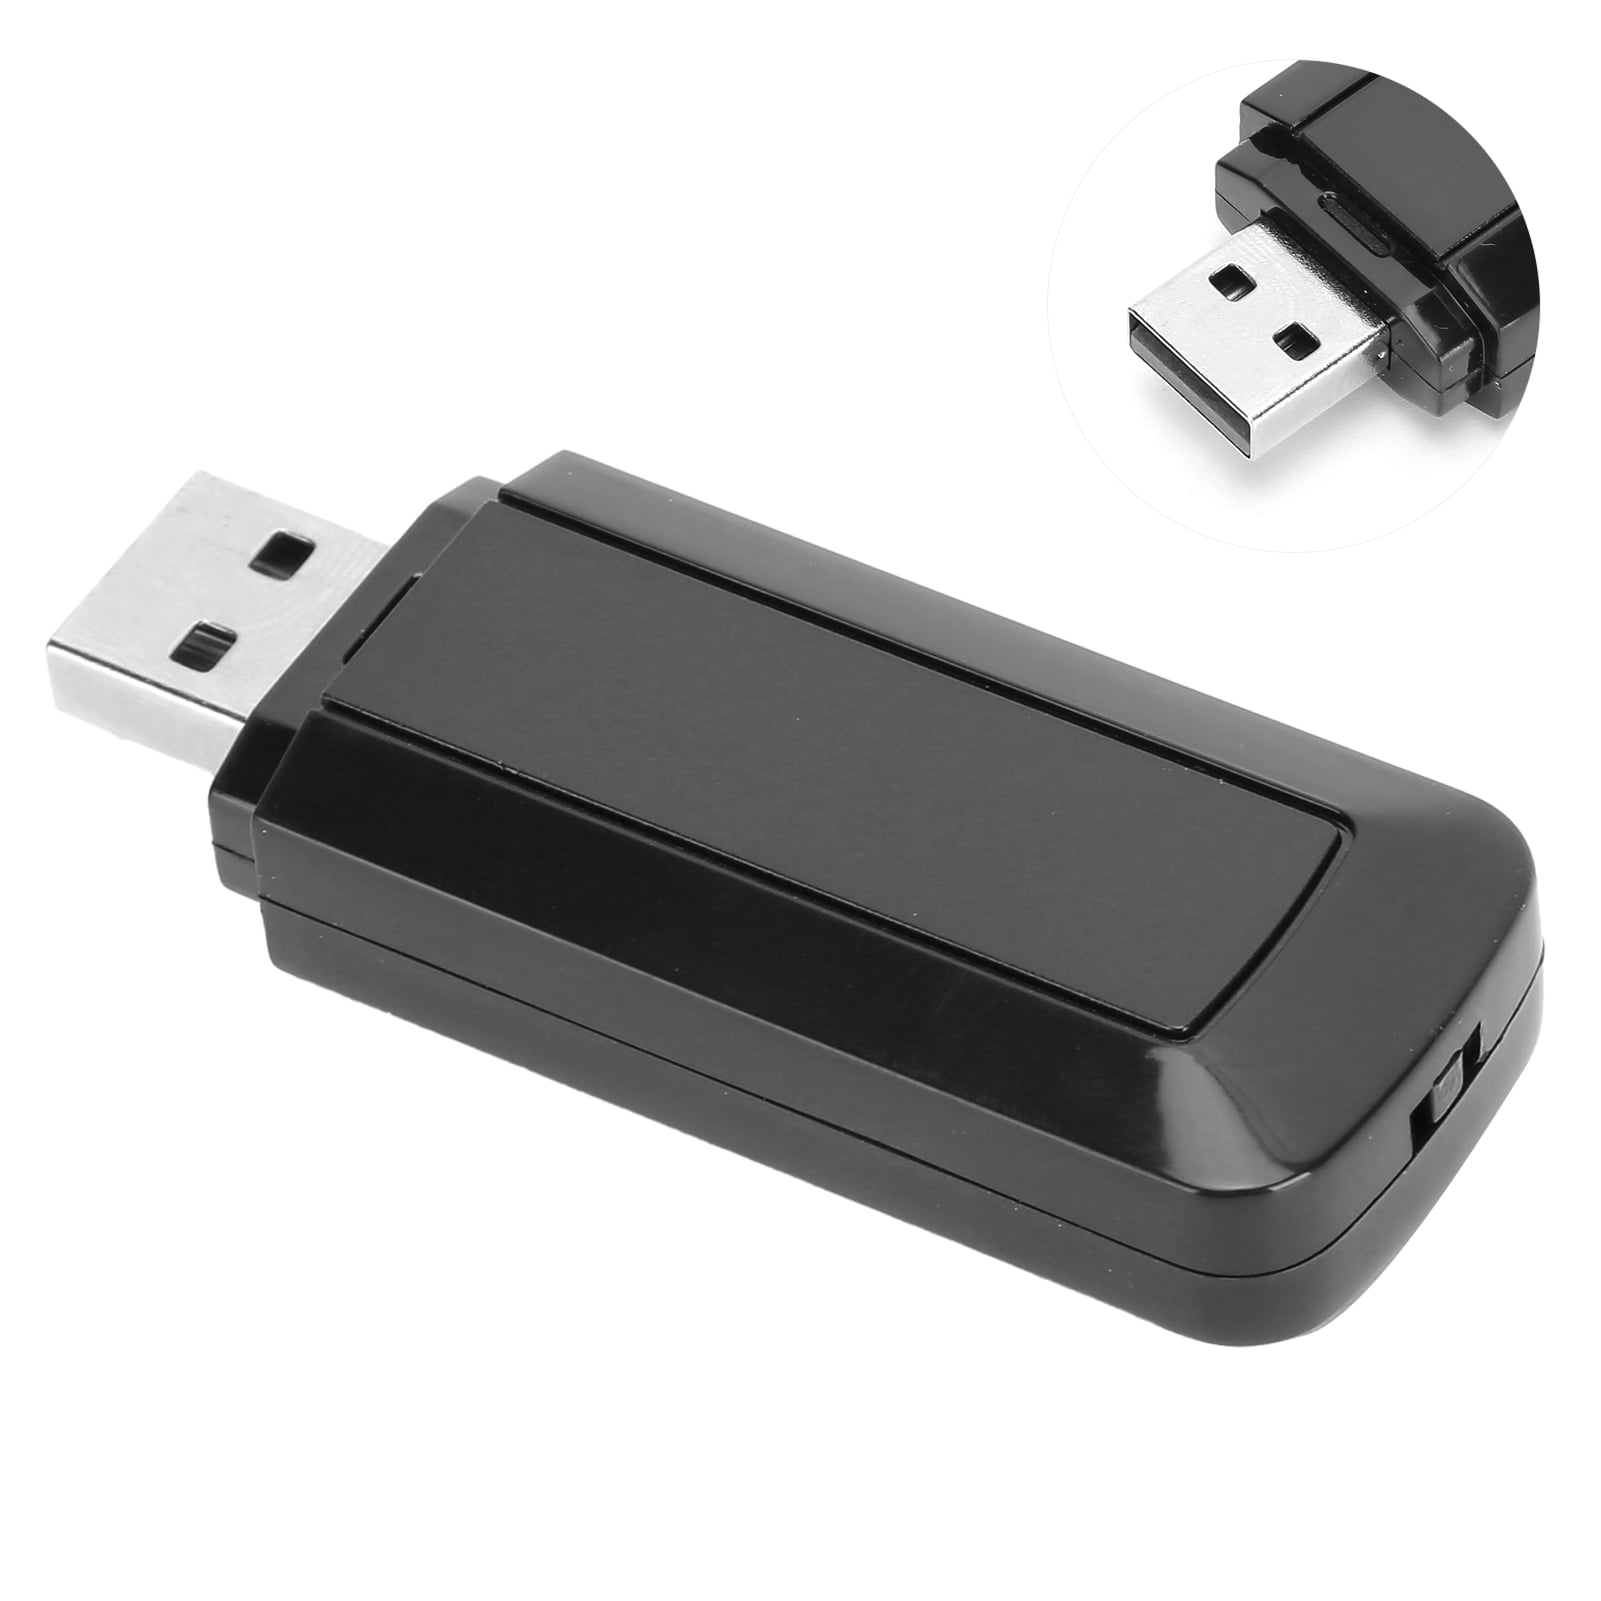 FTVOGUE Card,Wireless Adapter for 7/8/10/ for 150MBPS 802.11n,Wifi Adapter - Walmart.com